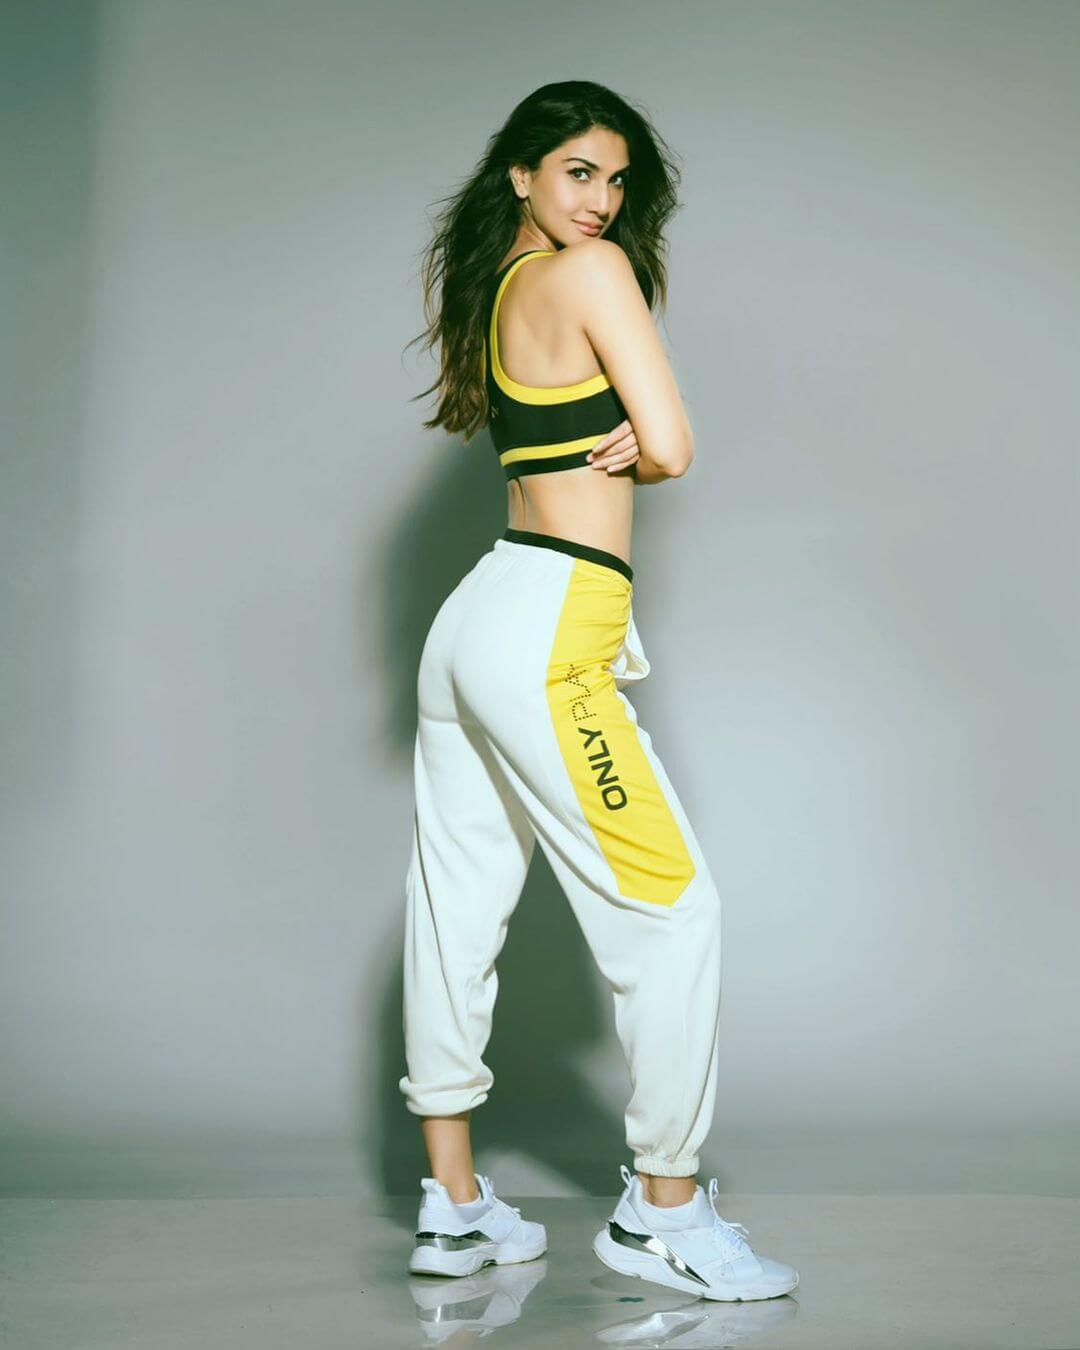 Trendy And Amazing Bollywood Fashion Vaani Kapoor's Sassy Look In Black Gym Top And White Casual Lower